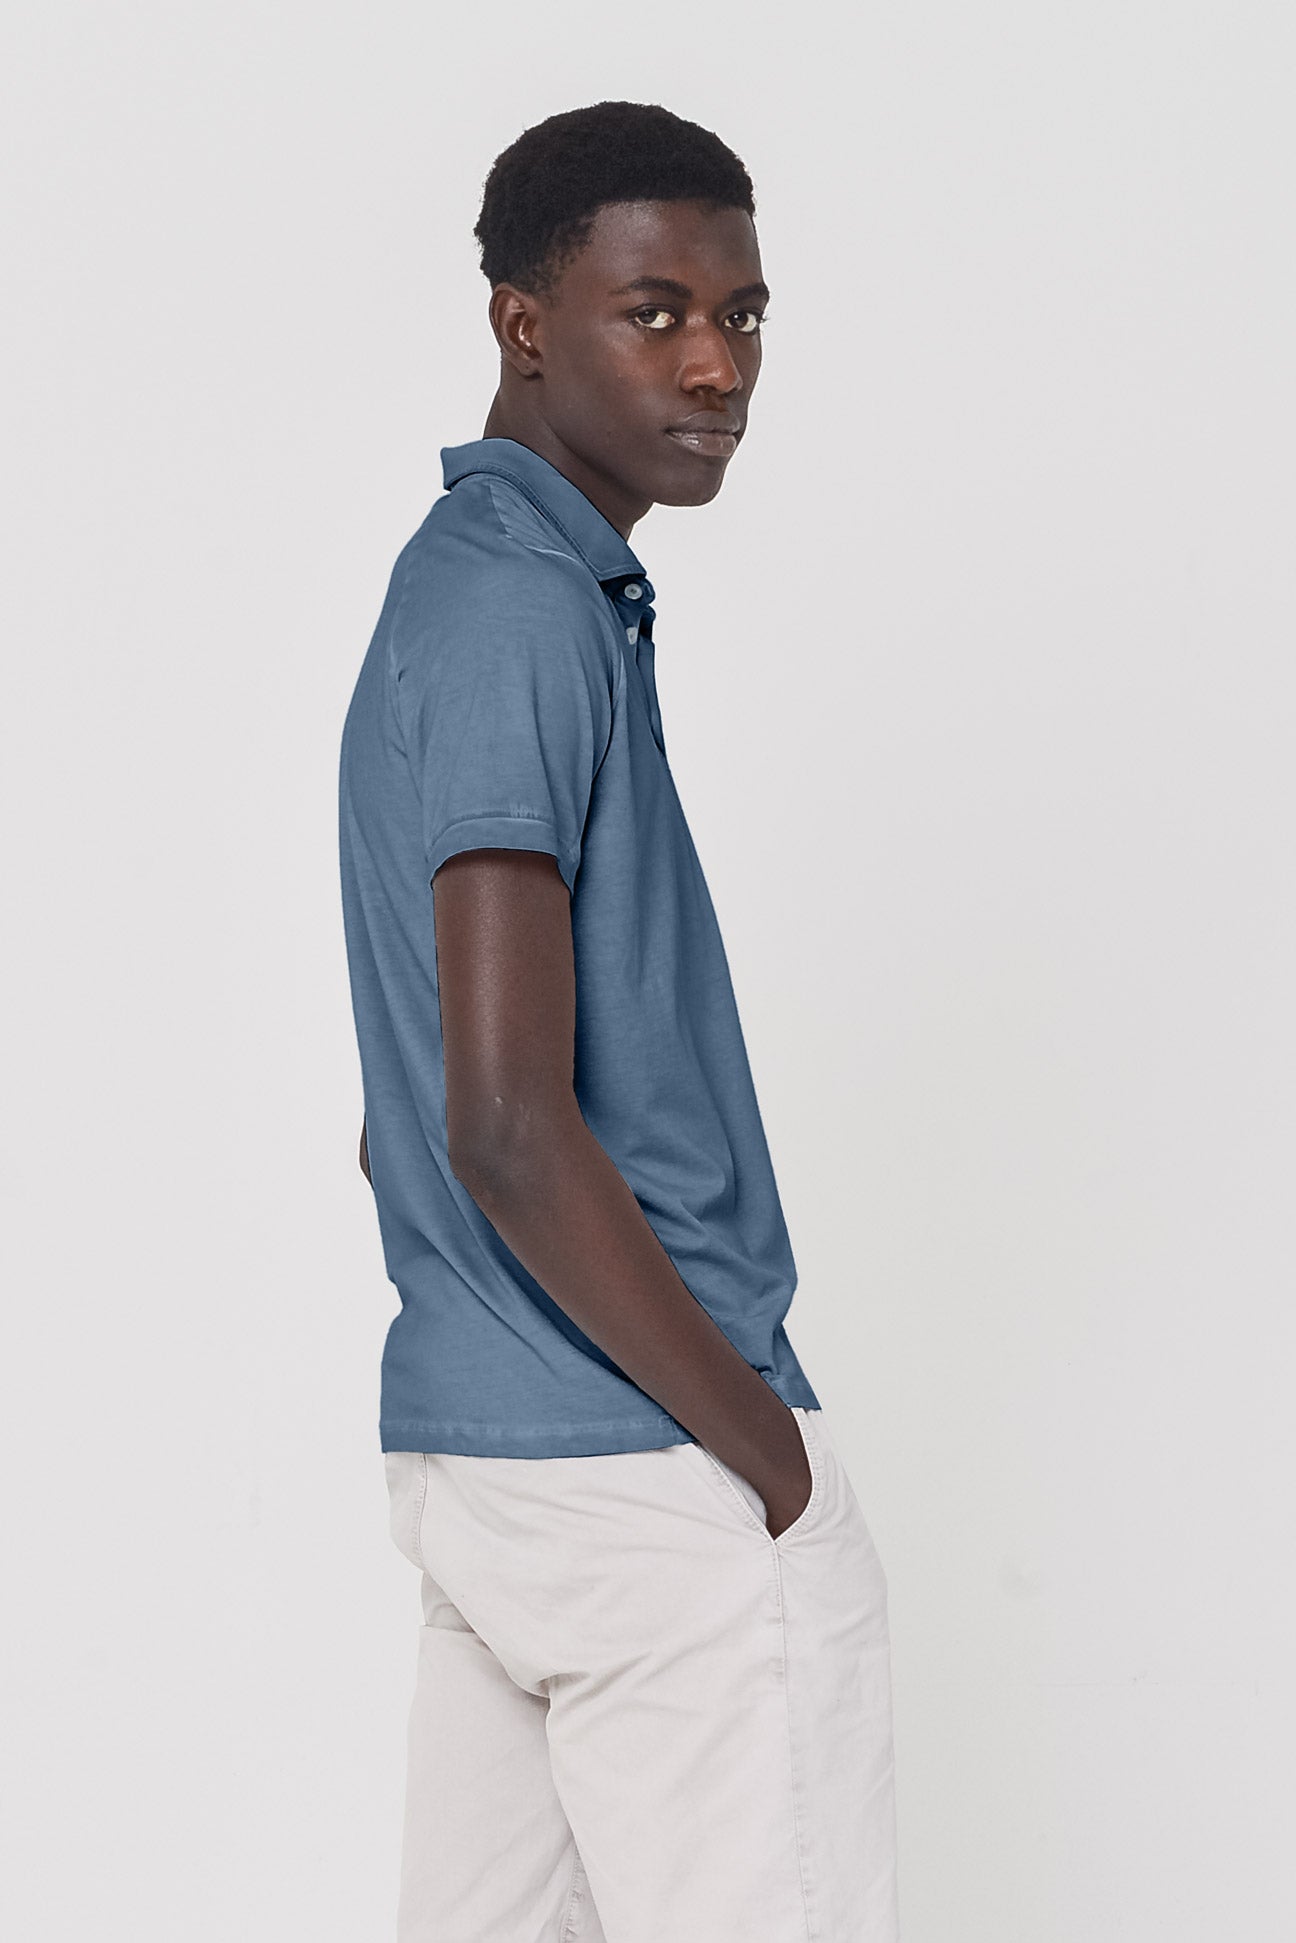 Performance Polo in Jeans - Polos